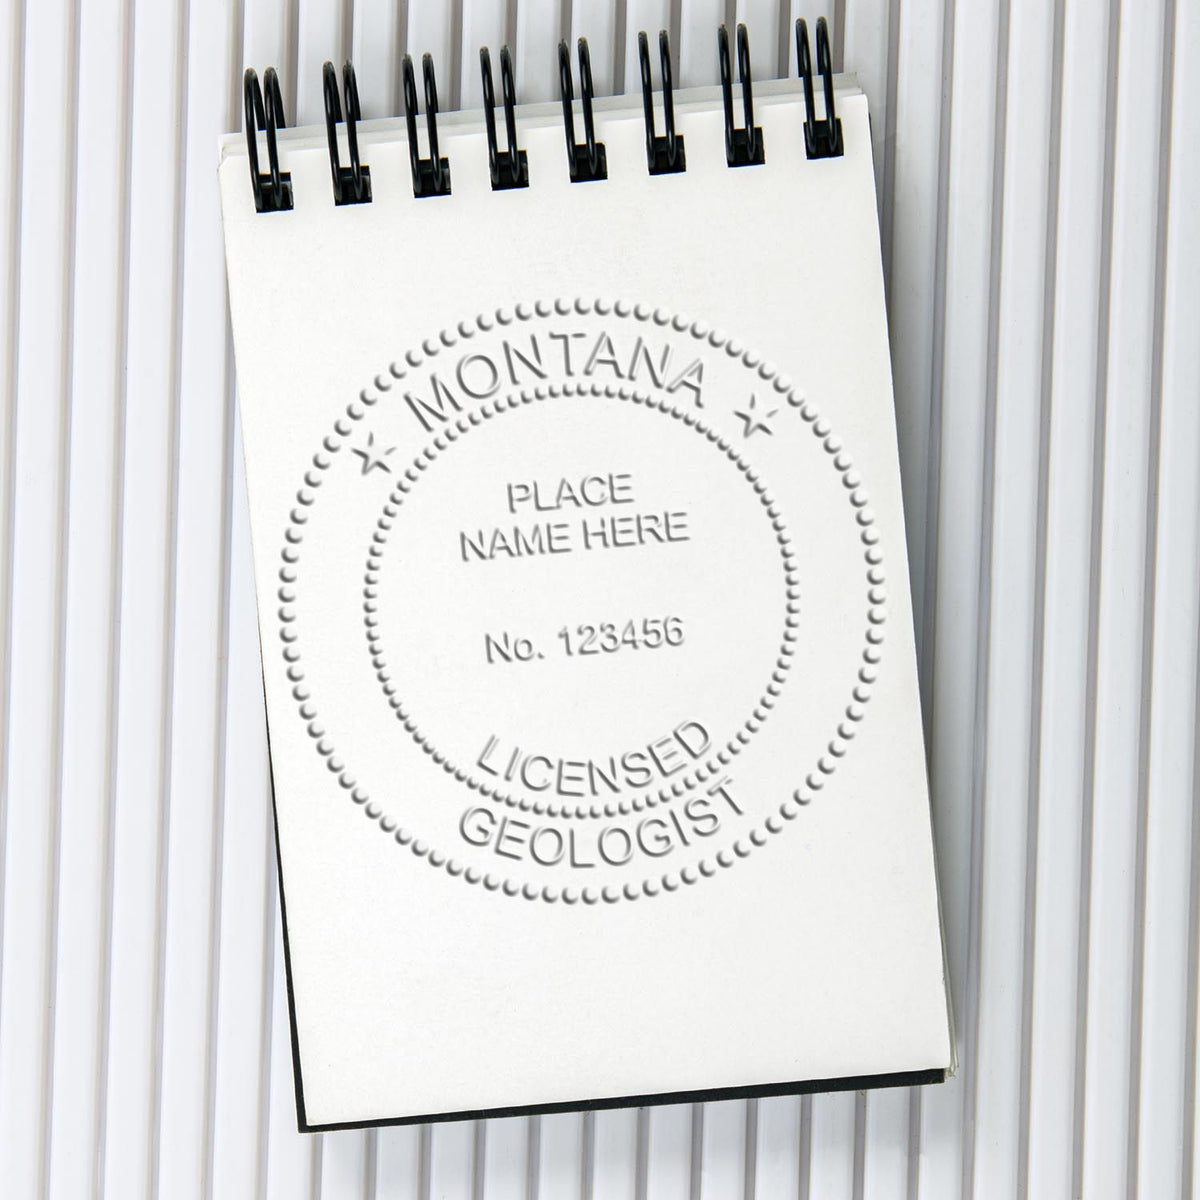 A photograph of the Gift Montana Geologist Seal stamp impression reveals a vivid, professional image of the on paper.